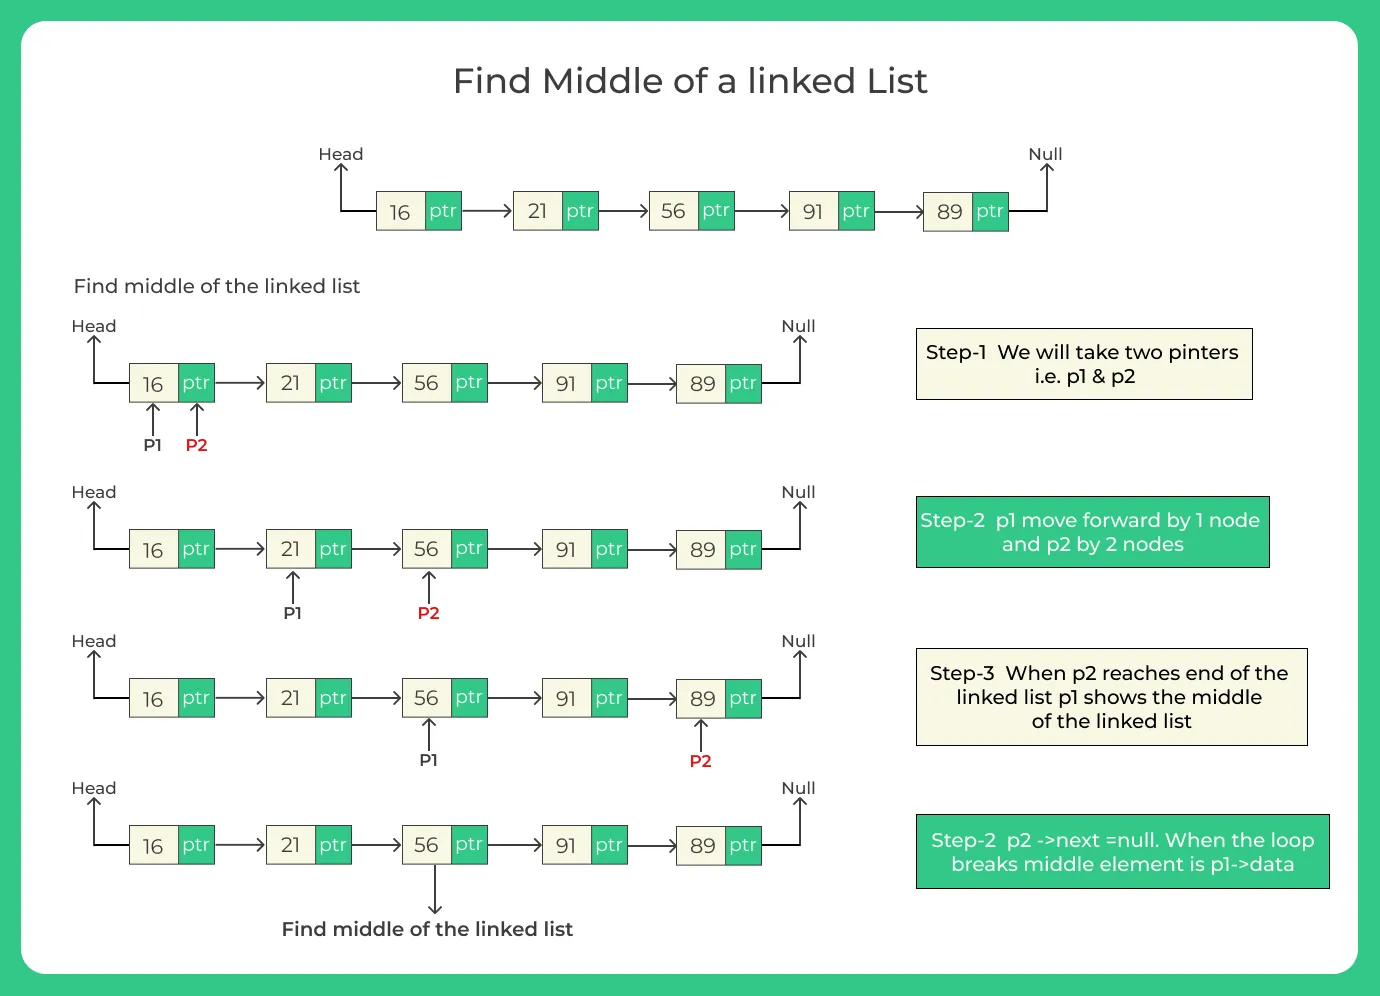 Find middle of a linked list